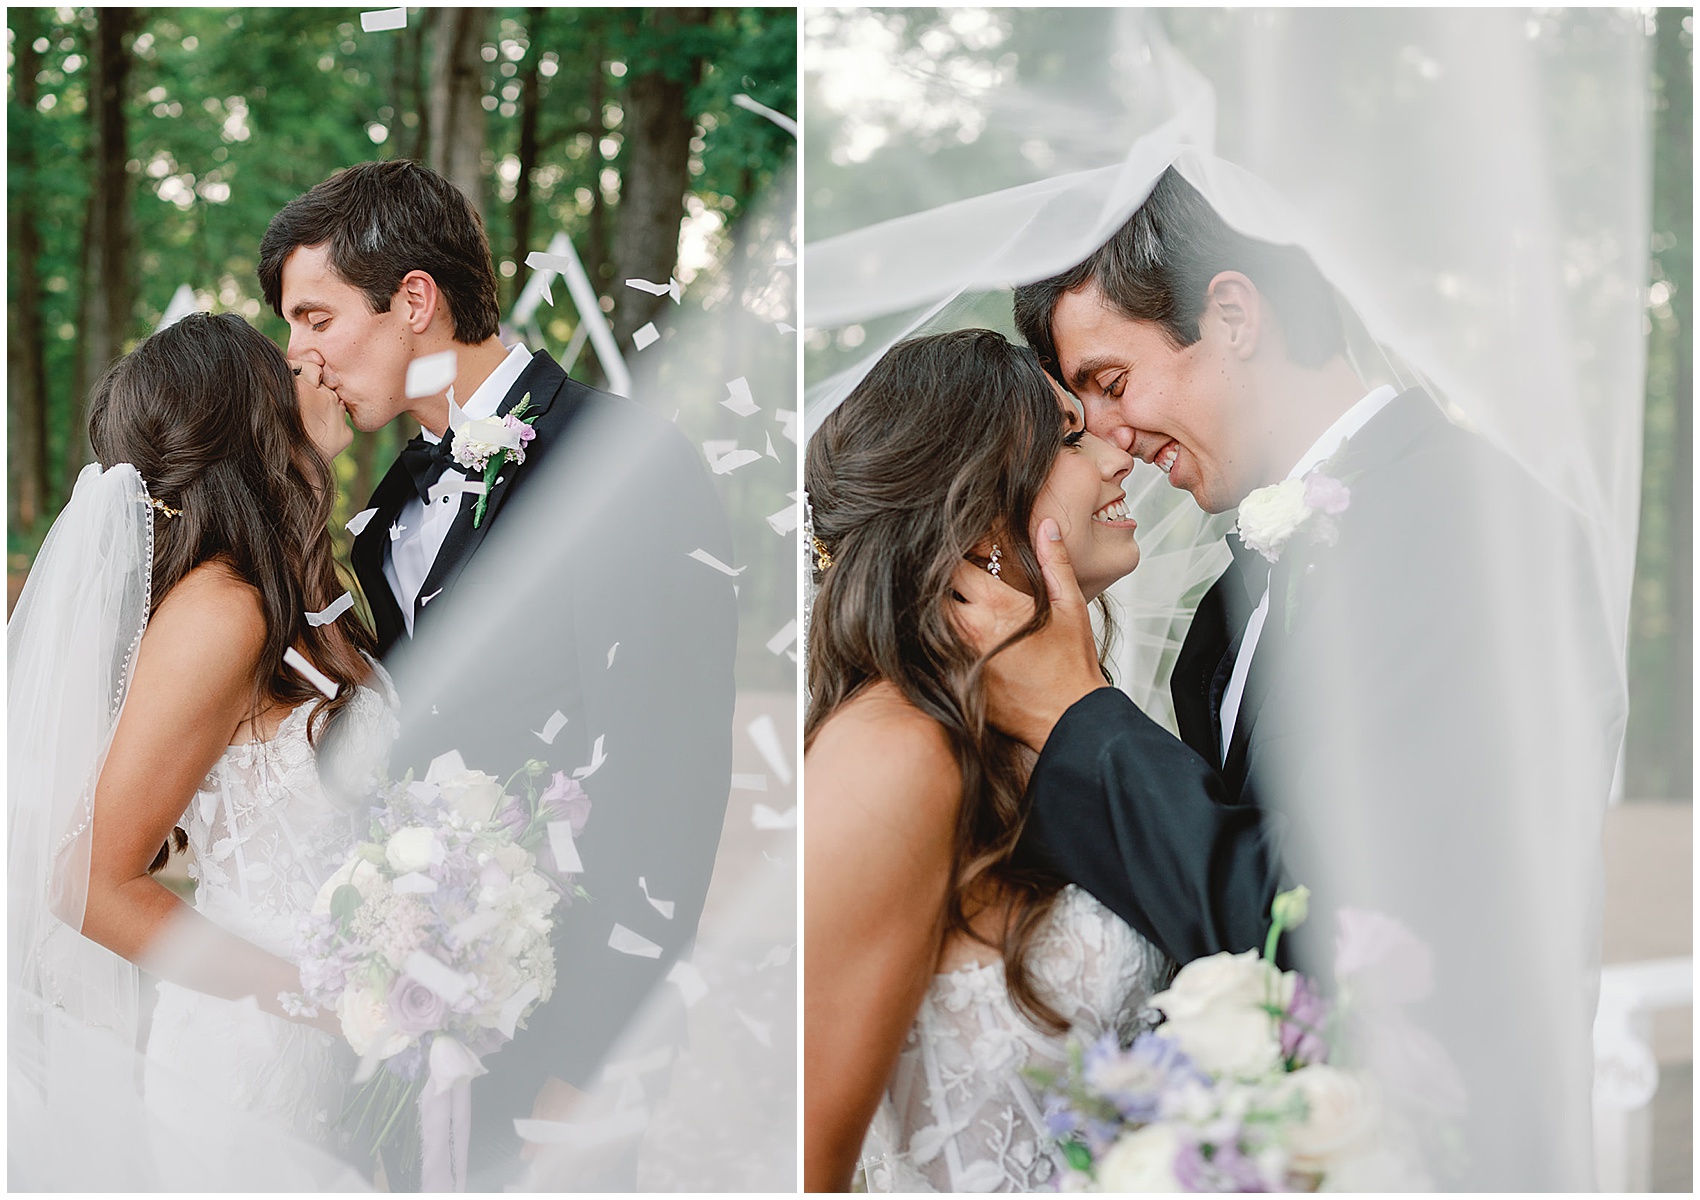 Newlyweds kiss while hiding under the veil and being showered in confetti